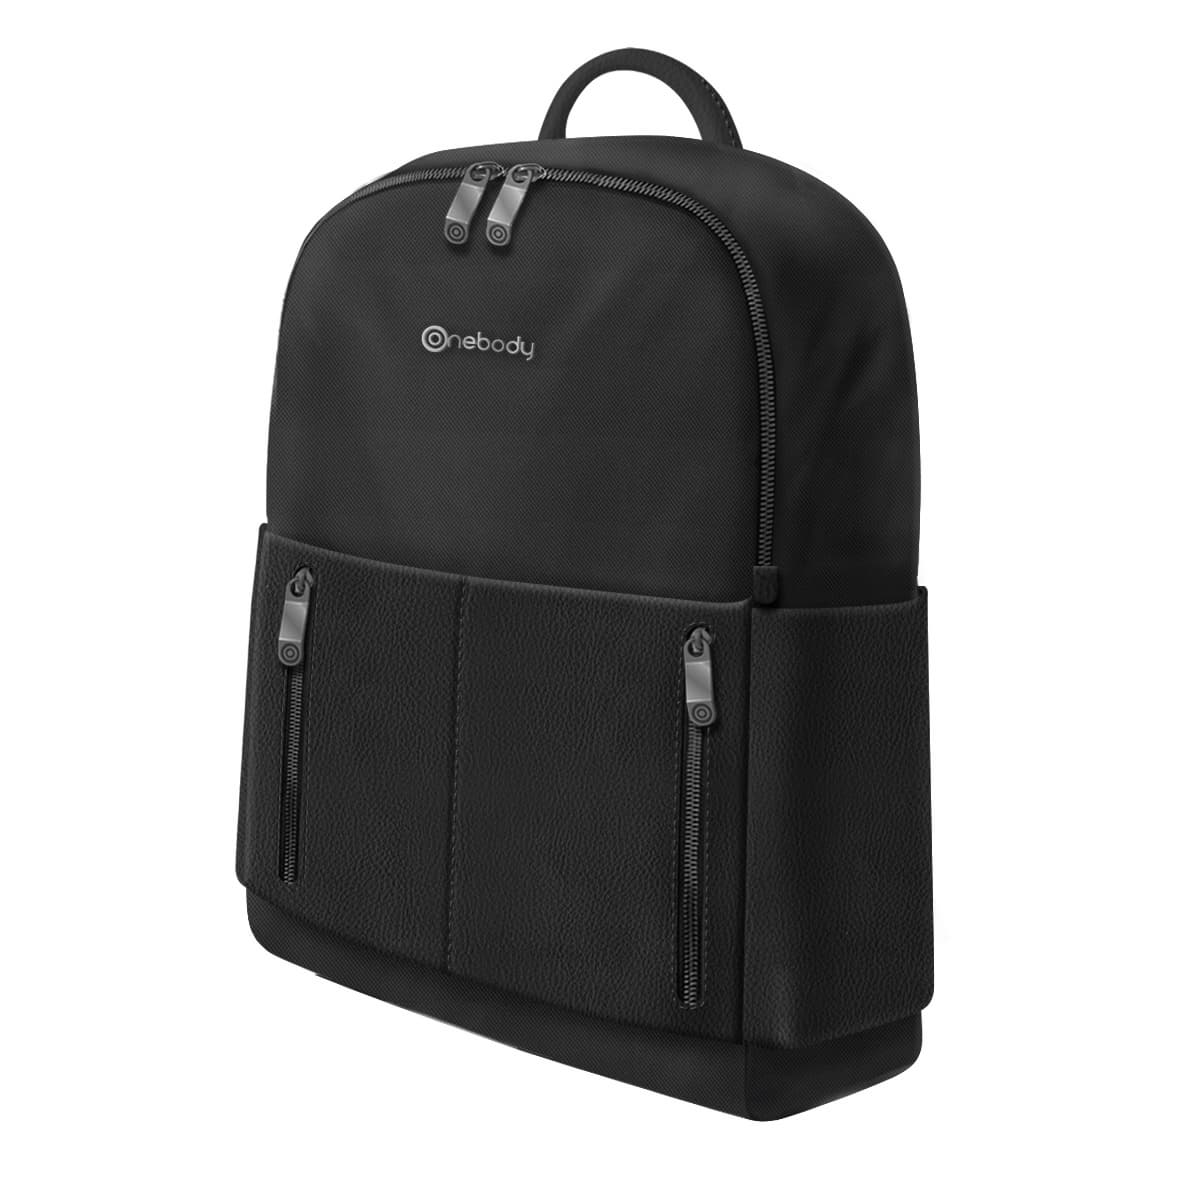 Onebody Laptop Backpack Bag_12 for Travel Business Casual